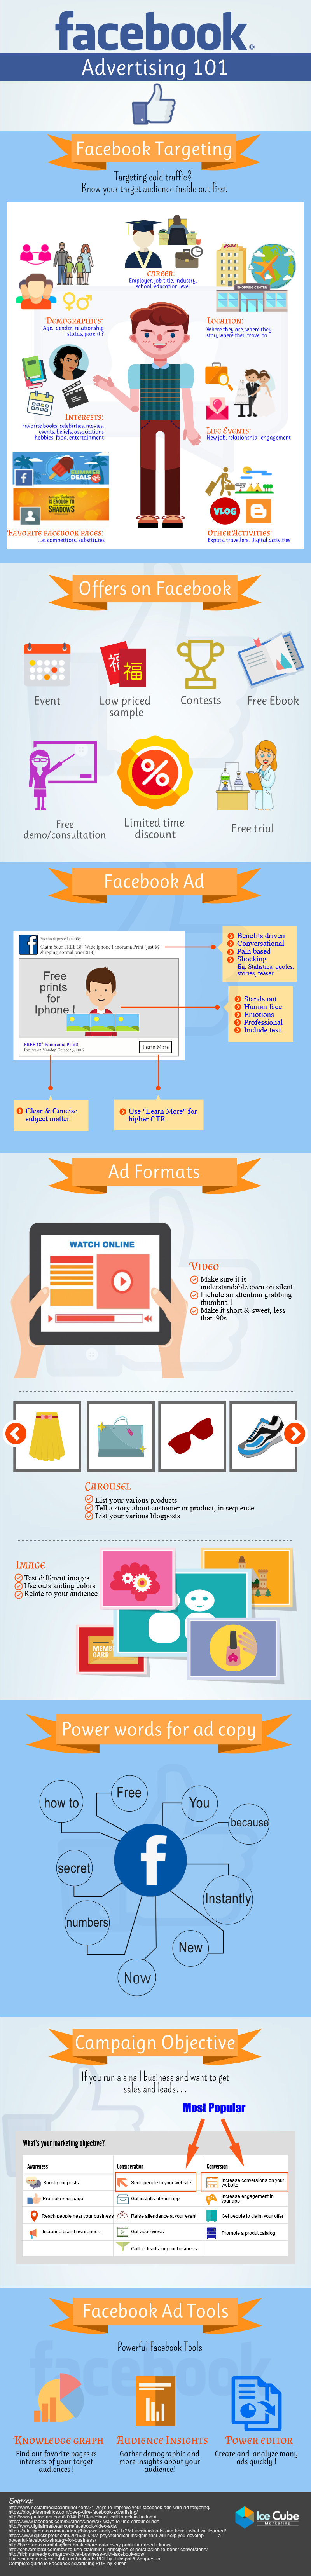 Facebook advertising 101 - Ice Cube Marketing infographic